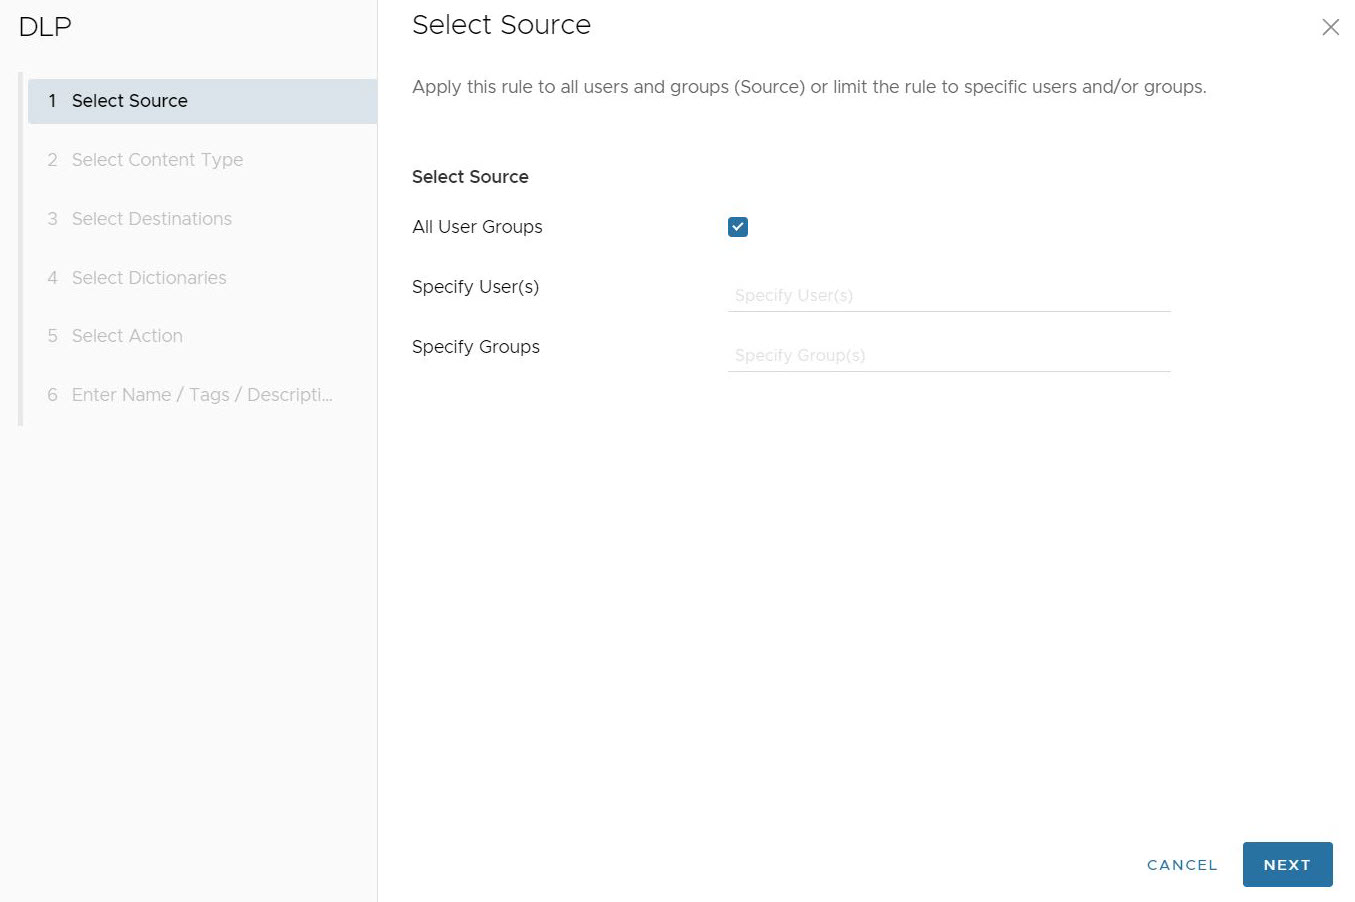 First option to configure is Source, by default this is set to All User Groups.